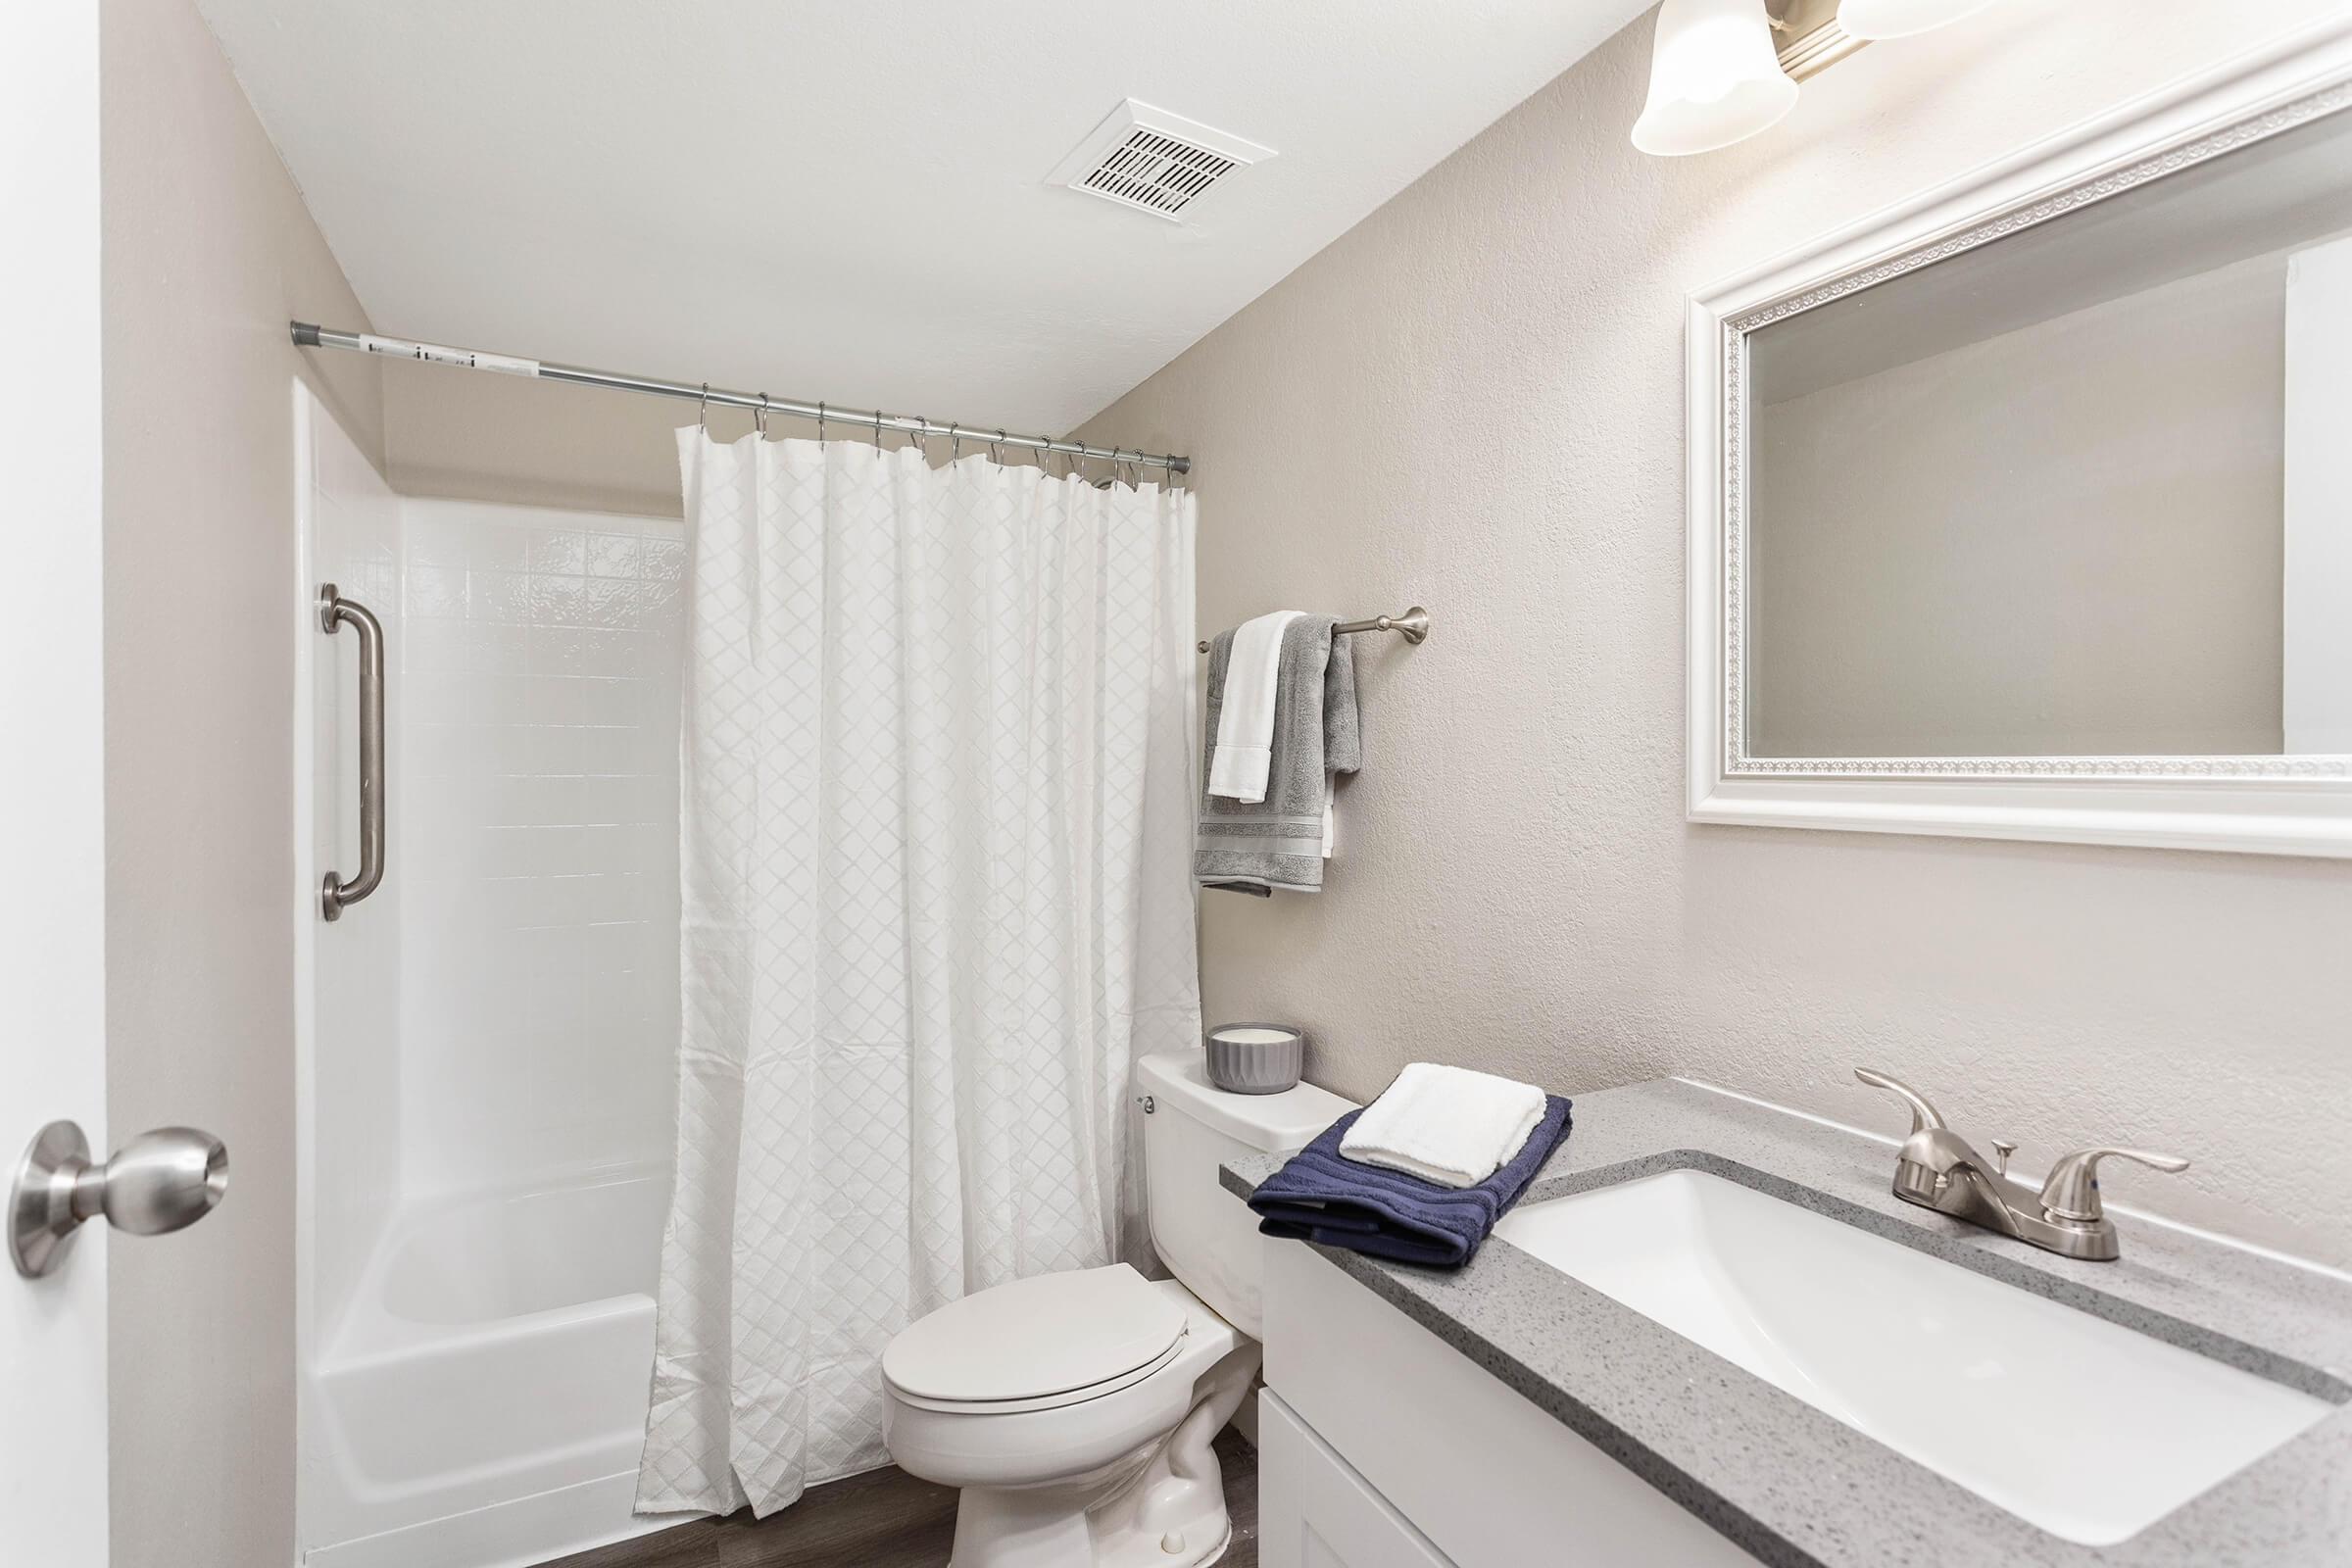 renovated bright bathroom with shower, toilet, quartz countertop sink, and small hand towels